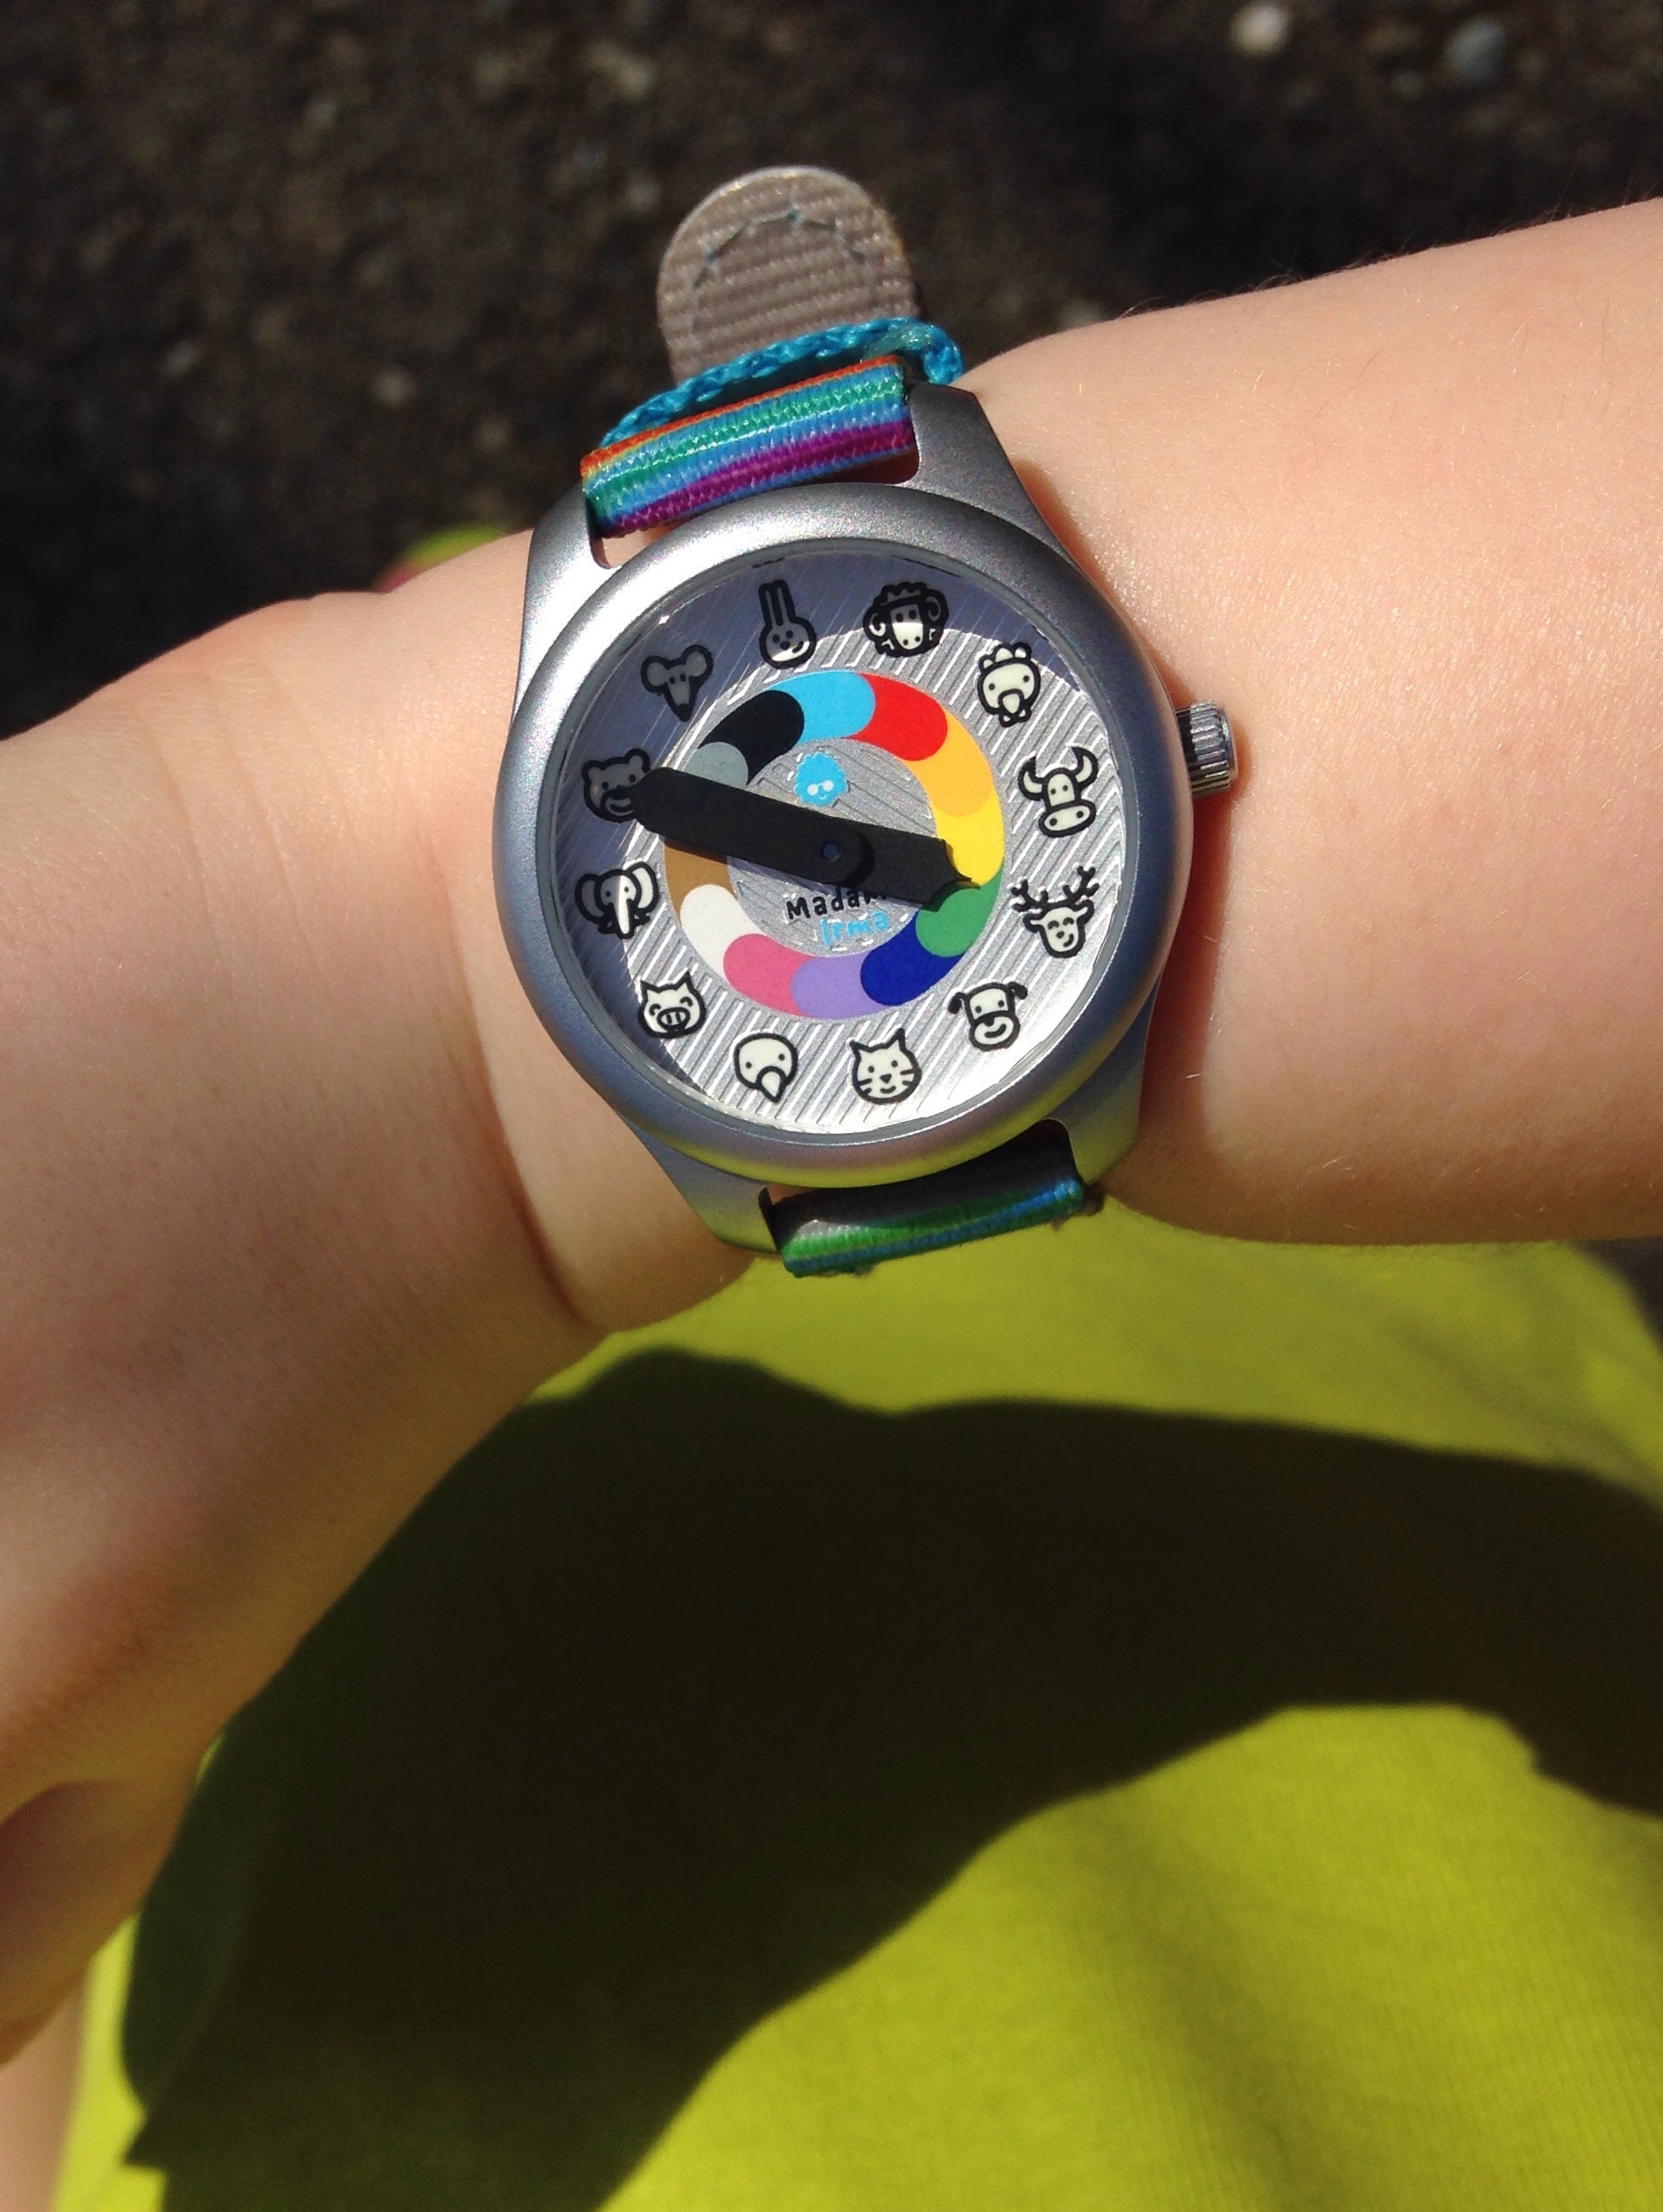 Madame Irma Watches Teaches Kids to Tell Time in Style